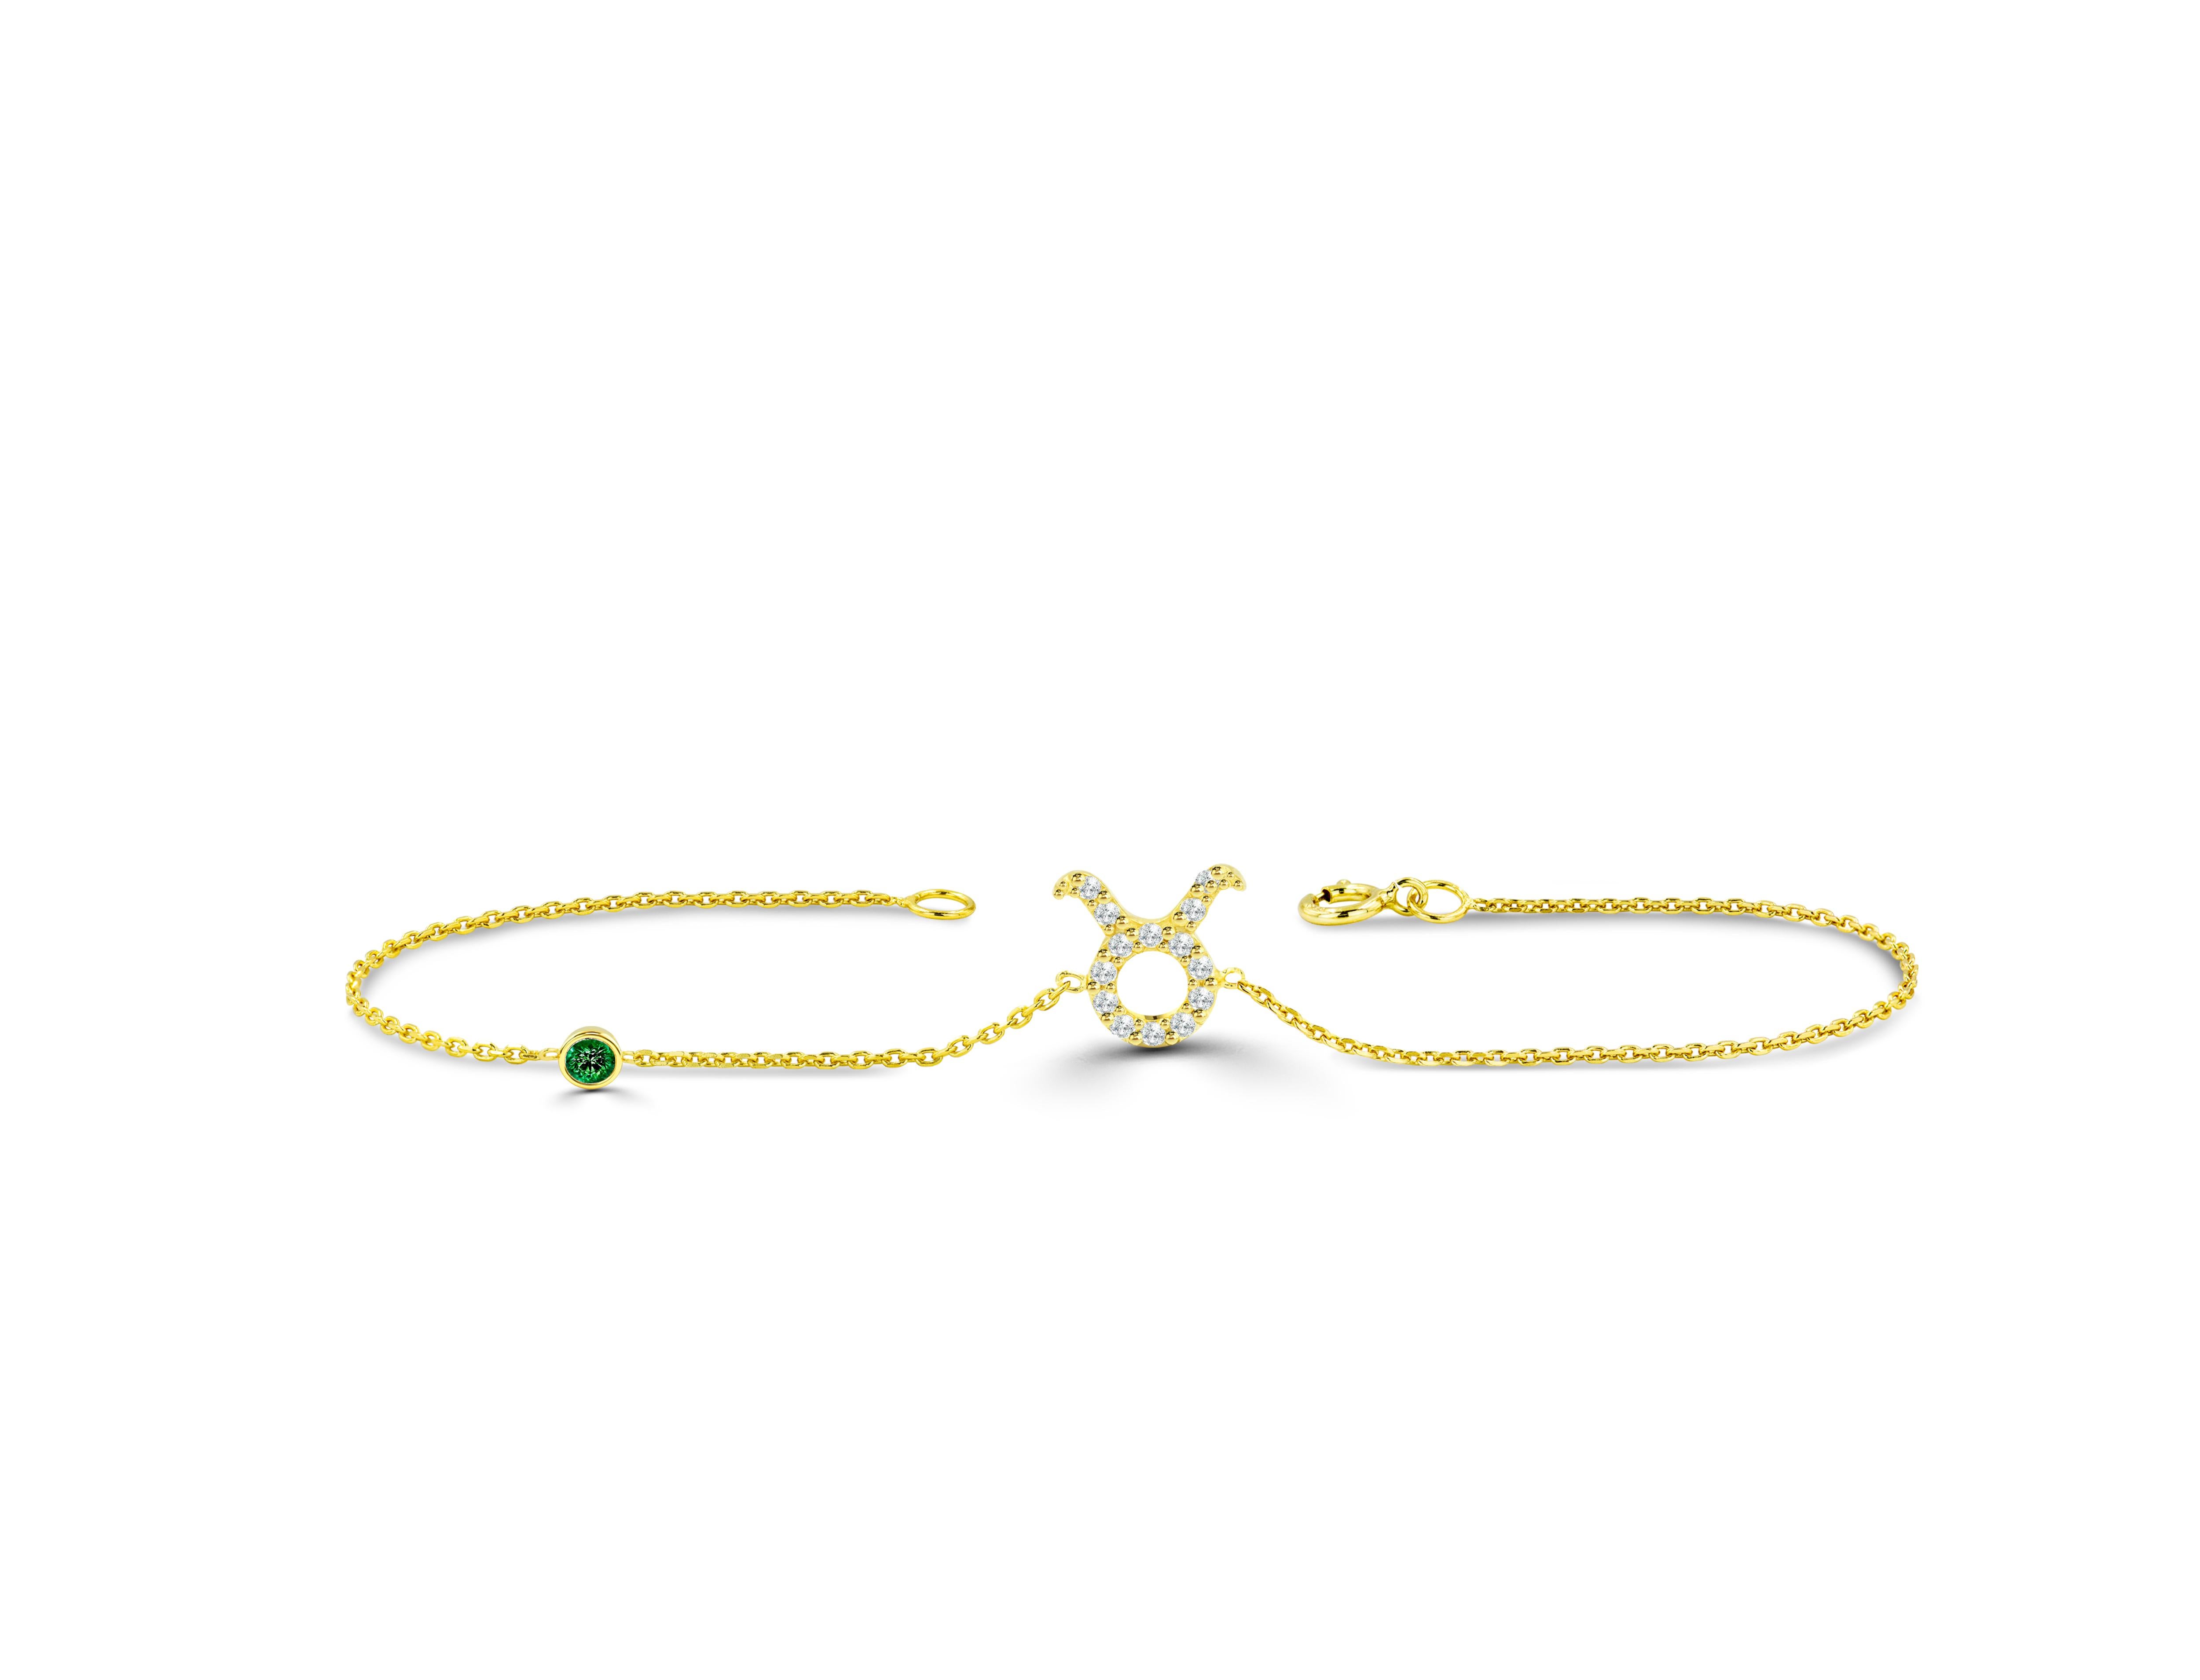 This Taurus Diamond Bracelet is meant to represent you. This Zodiac sign bracelet comes with a birthstone of your choice. Our collection of zodiac jewelry includes this stunning Diamond Taurus piece. All Taurus out there, purchase this lovely